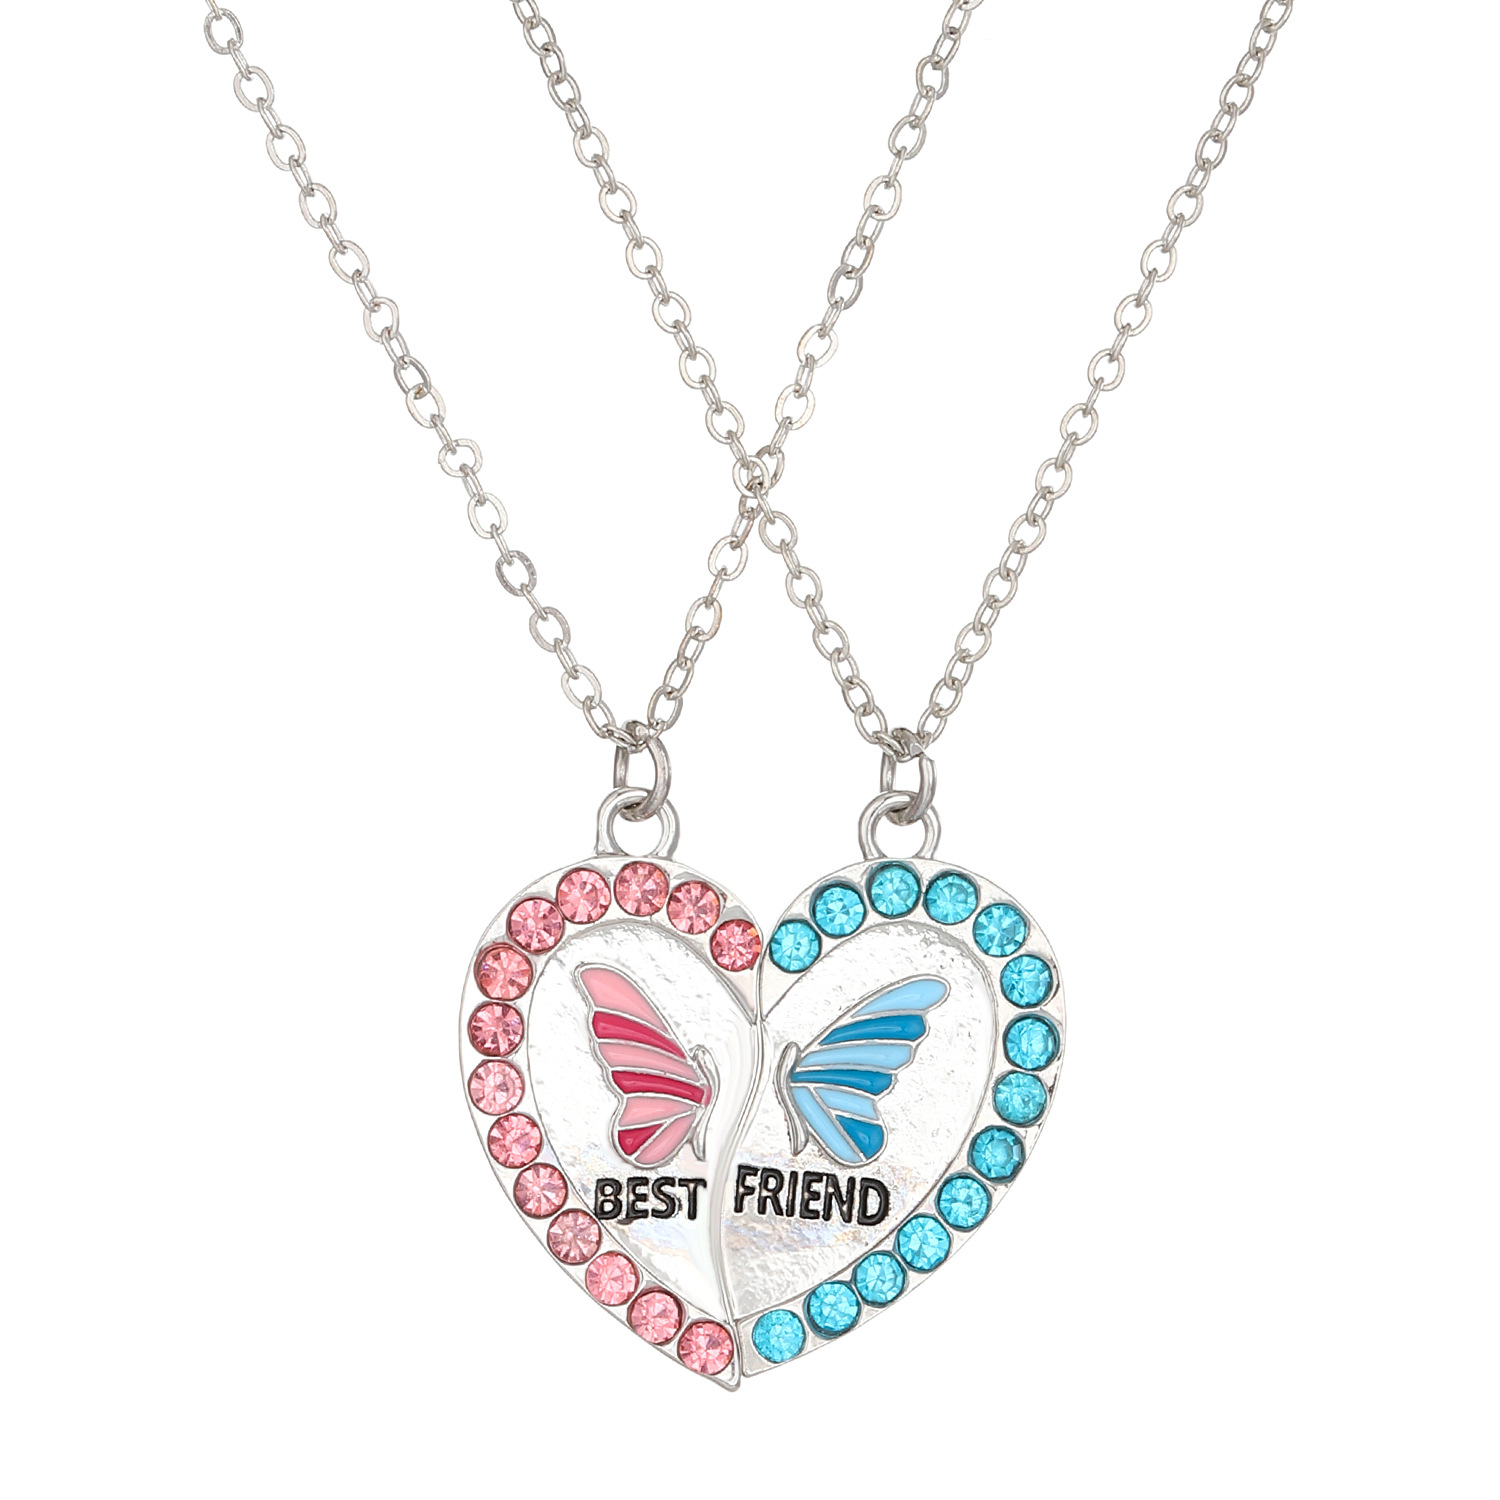 Gold Best Friends Butterfly Pendant Necklaces - 2 Pack